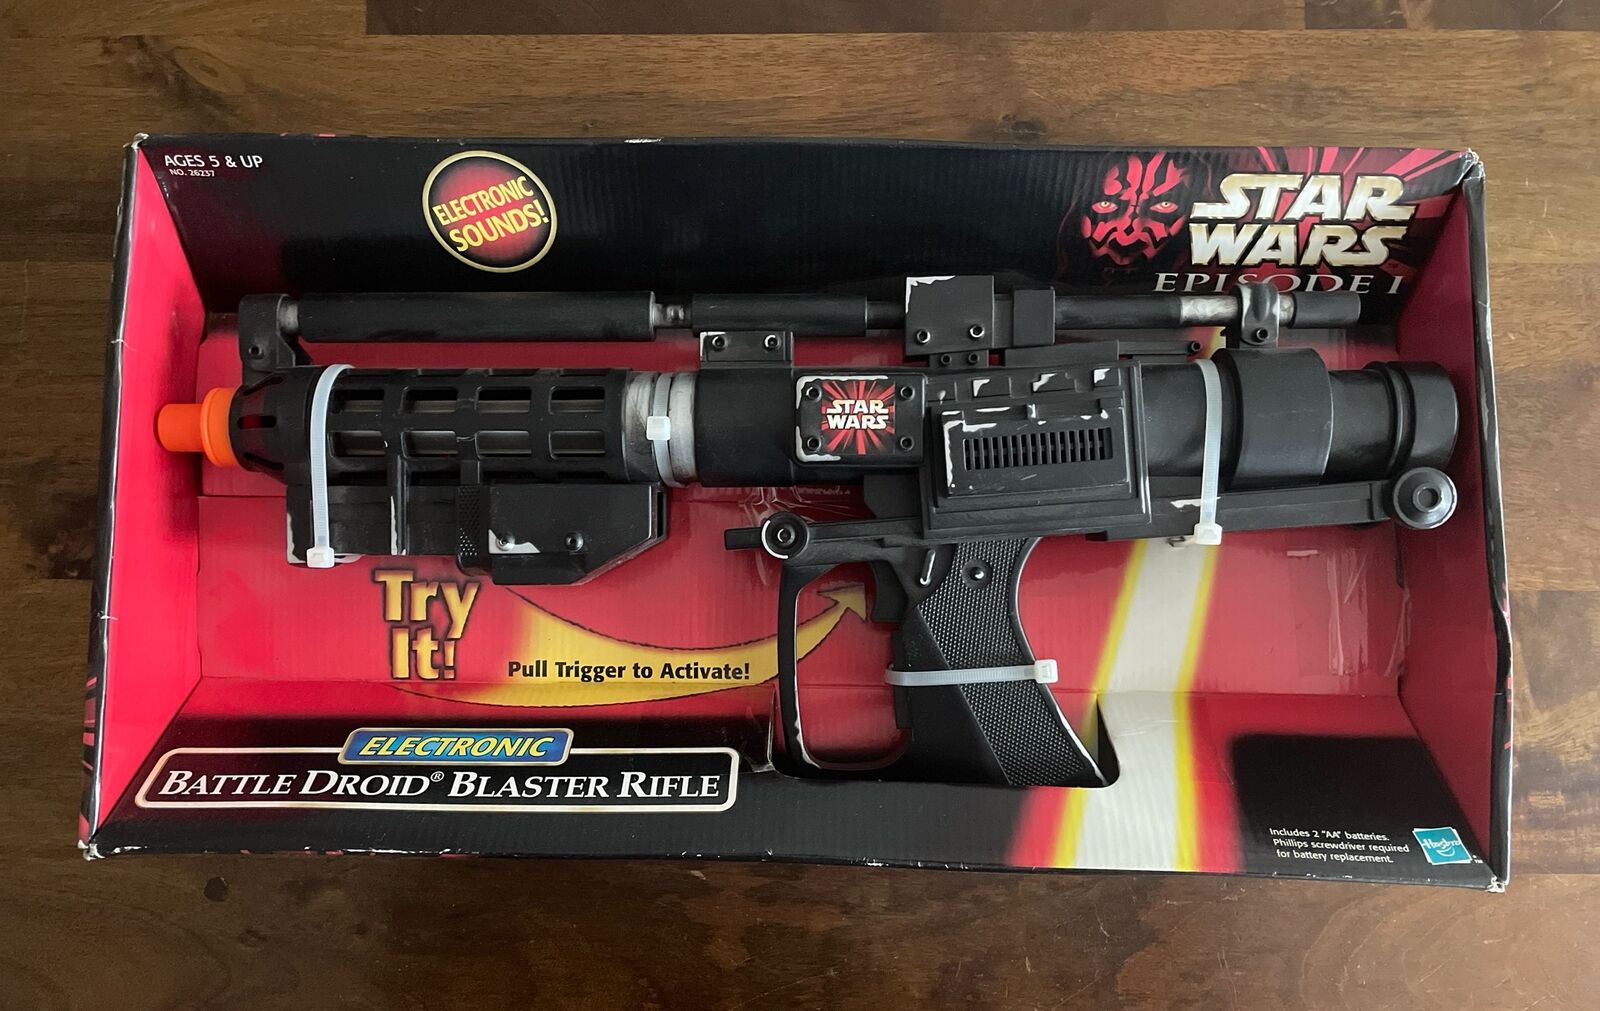 Hasbro Star Wars Episode 1 Electronic Battle Droid Blaster Rifle, Sounds - NEW